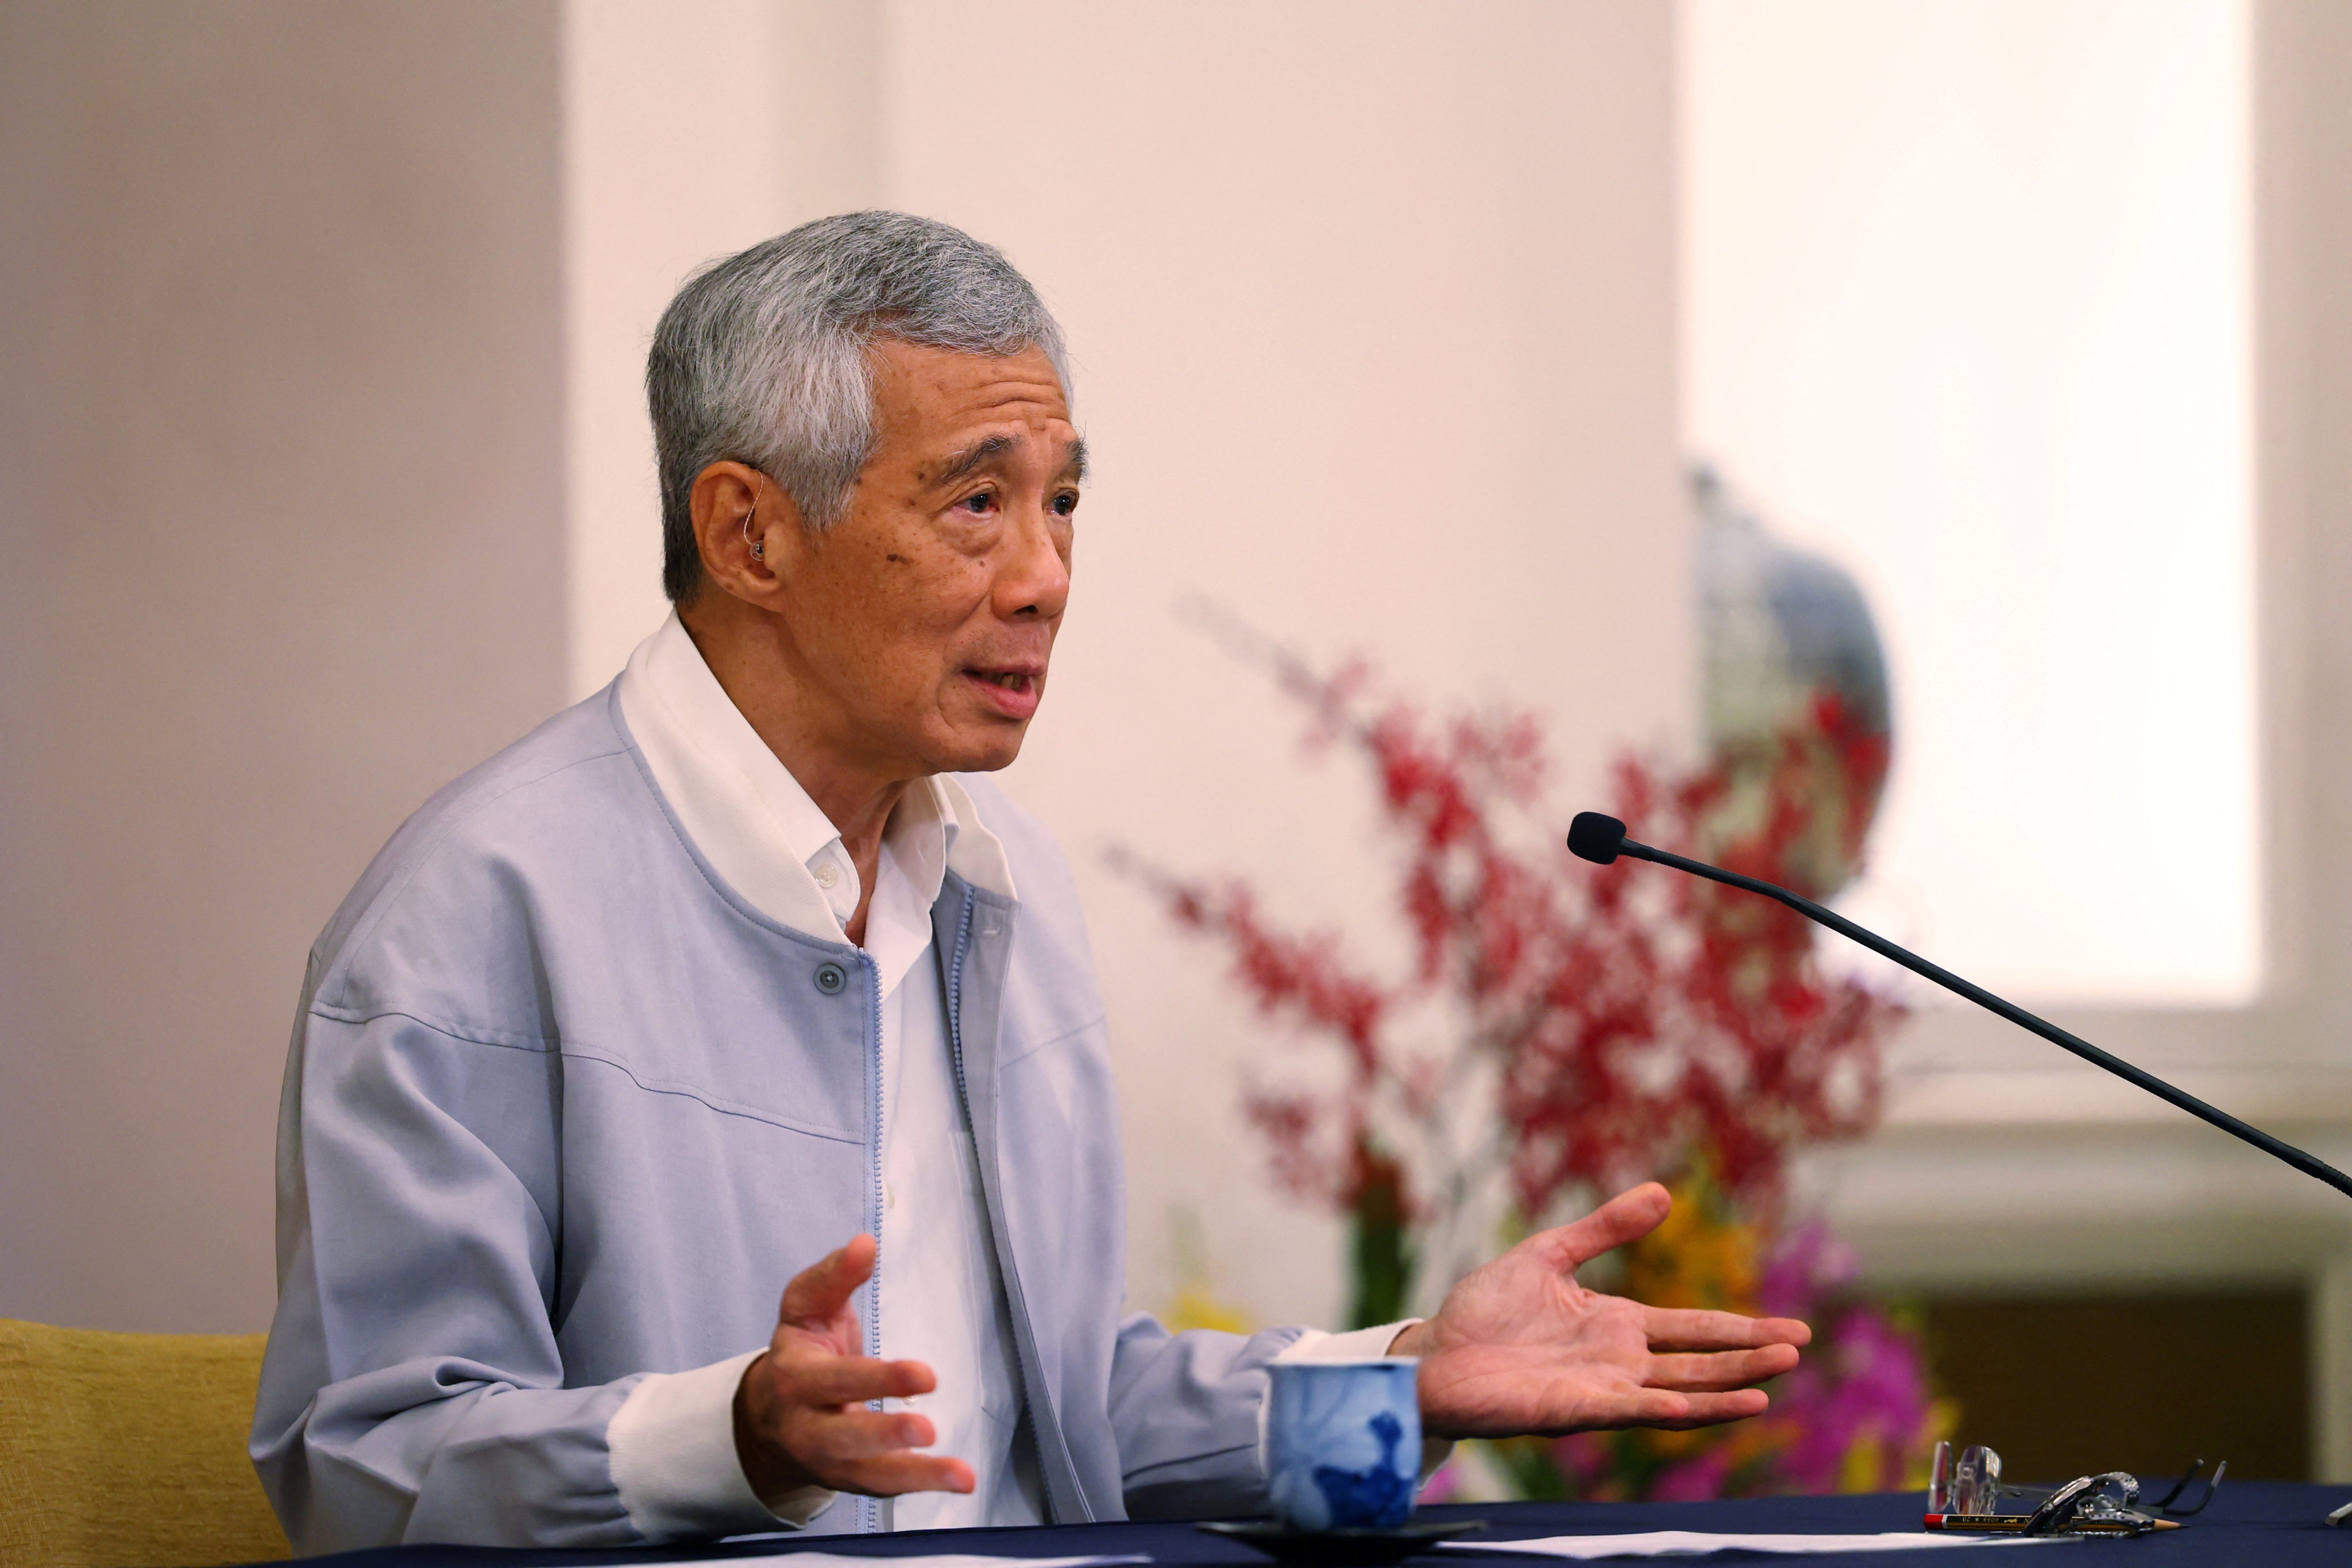 Prime Minister Lee, for his part, acknowledged in a press conference on Monday that the PAP was dealing with “a series of high-profile issues”. Photo: via Reuters